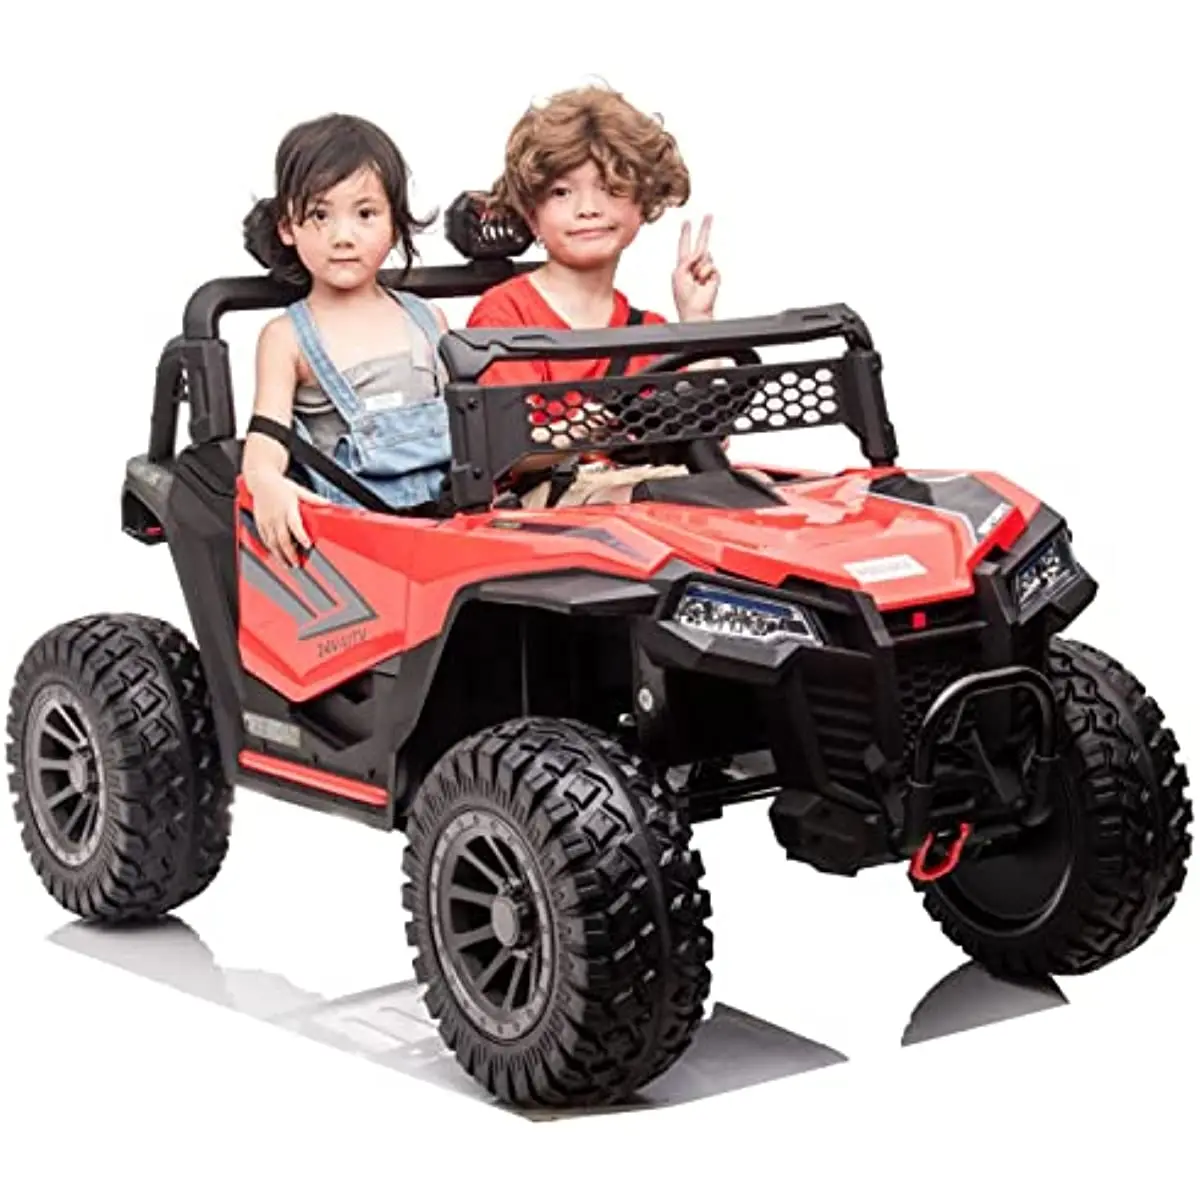 

24V XXL Kids Ride On Car 2 Seater, 4WD Electric Battery Powered Ride On Truck with Parent Remote Control